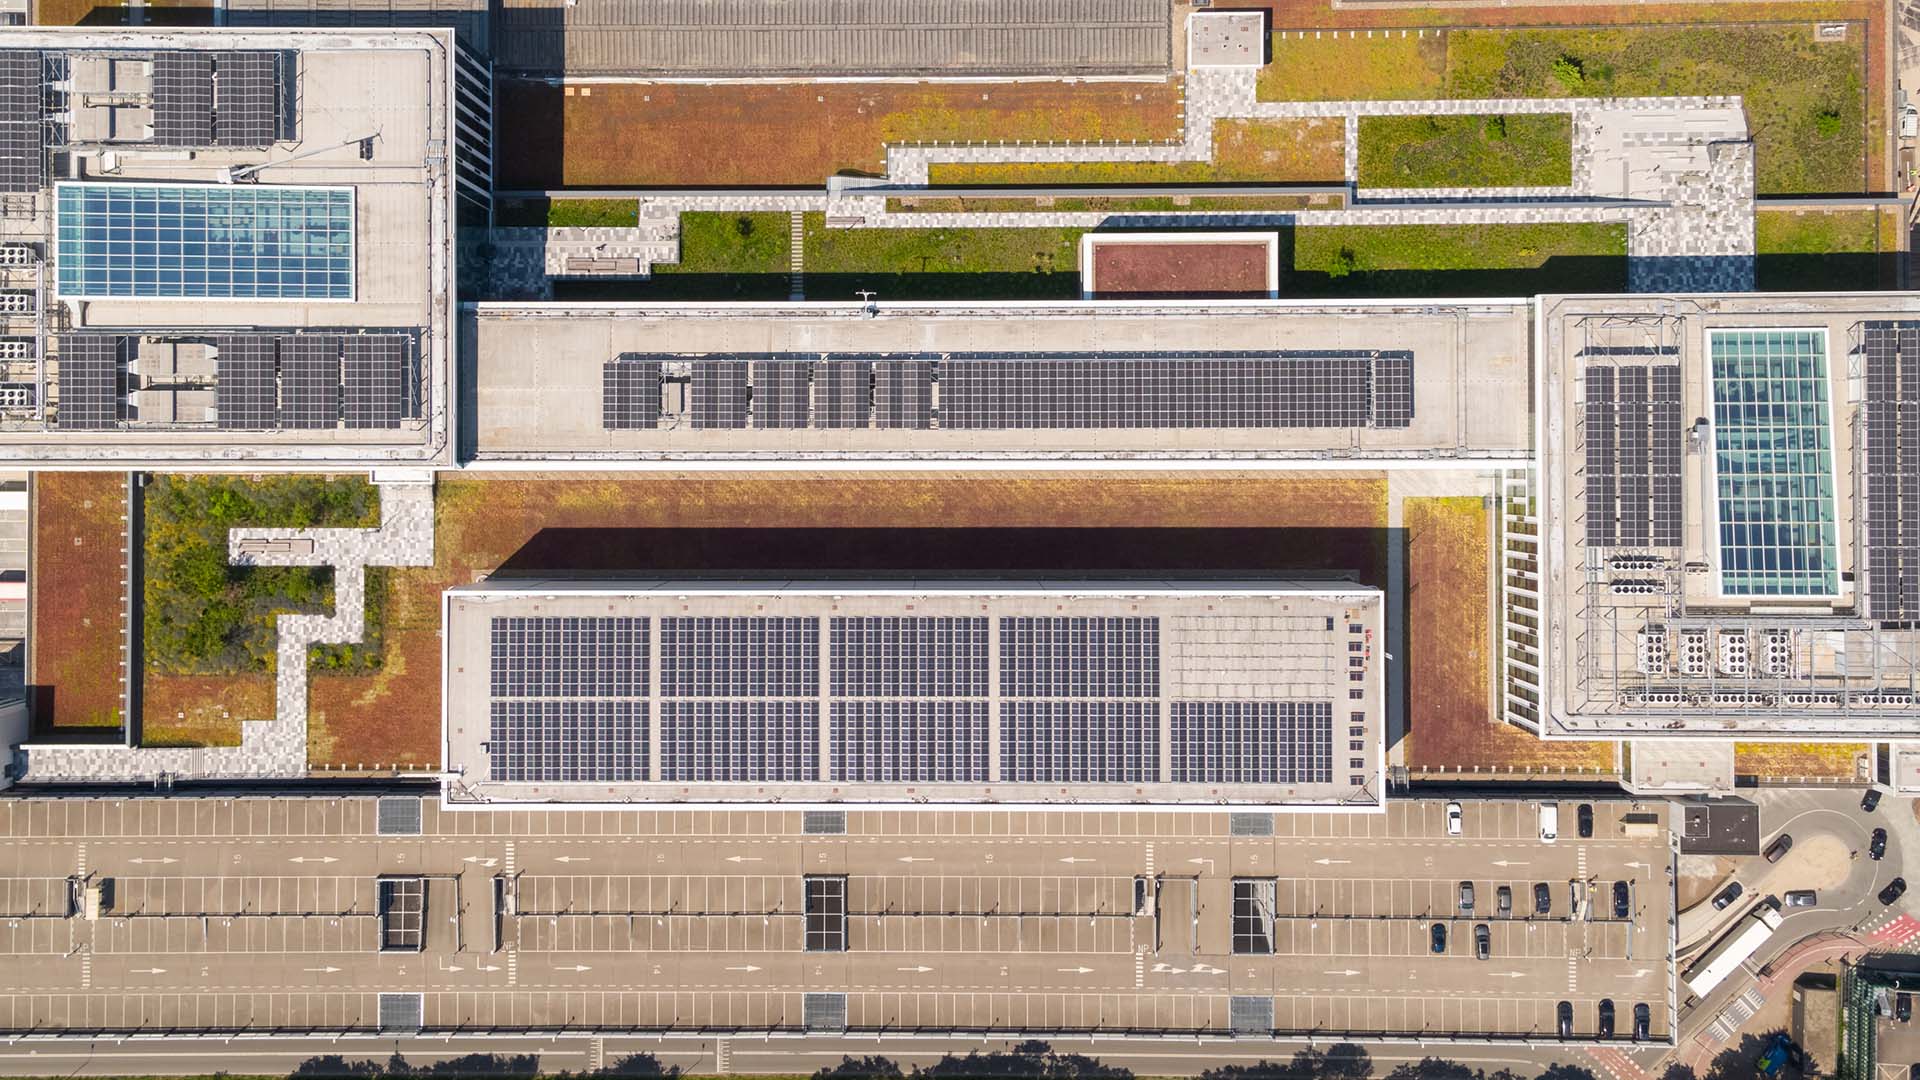 Ariel view of Building 6 KLM featuring a rooftop garden and solar panels. 